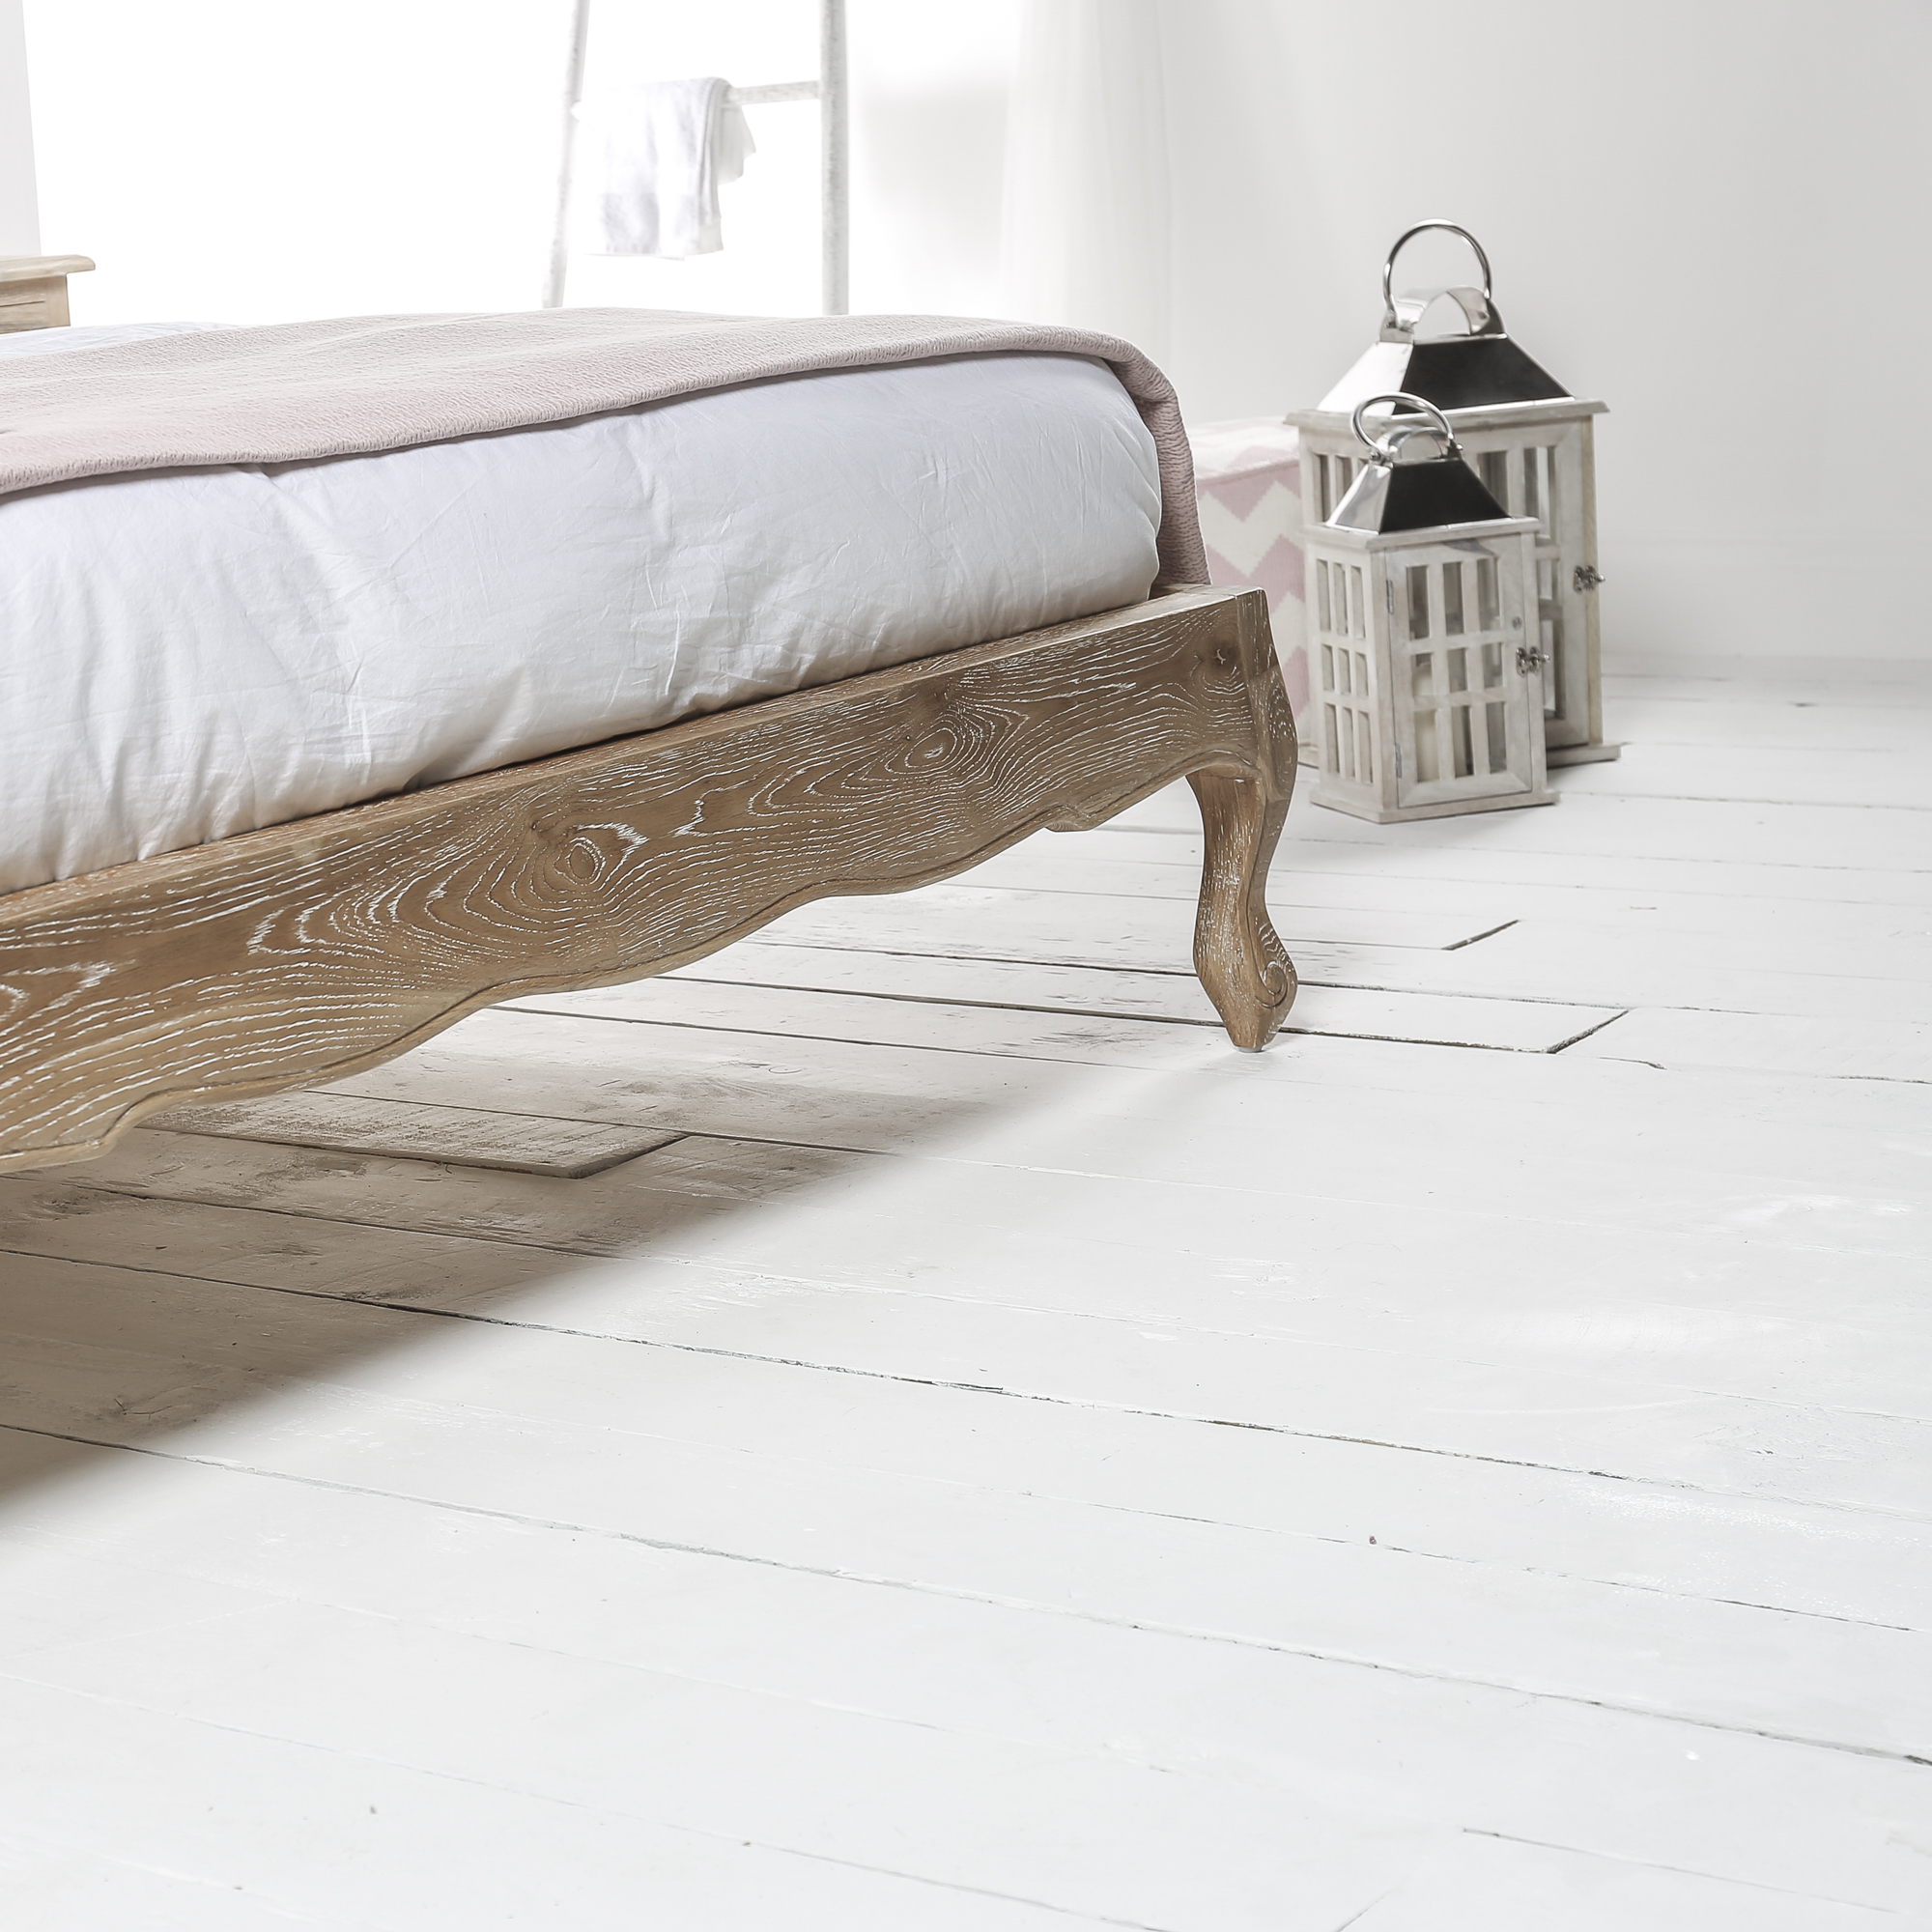 Clementine French Weathered Whitewash Oak Upholstered Low Foot Board Bed – Double